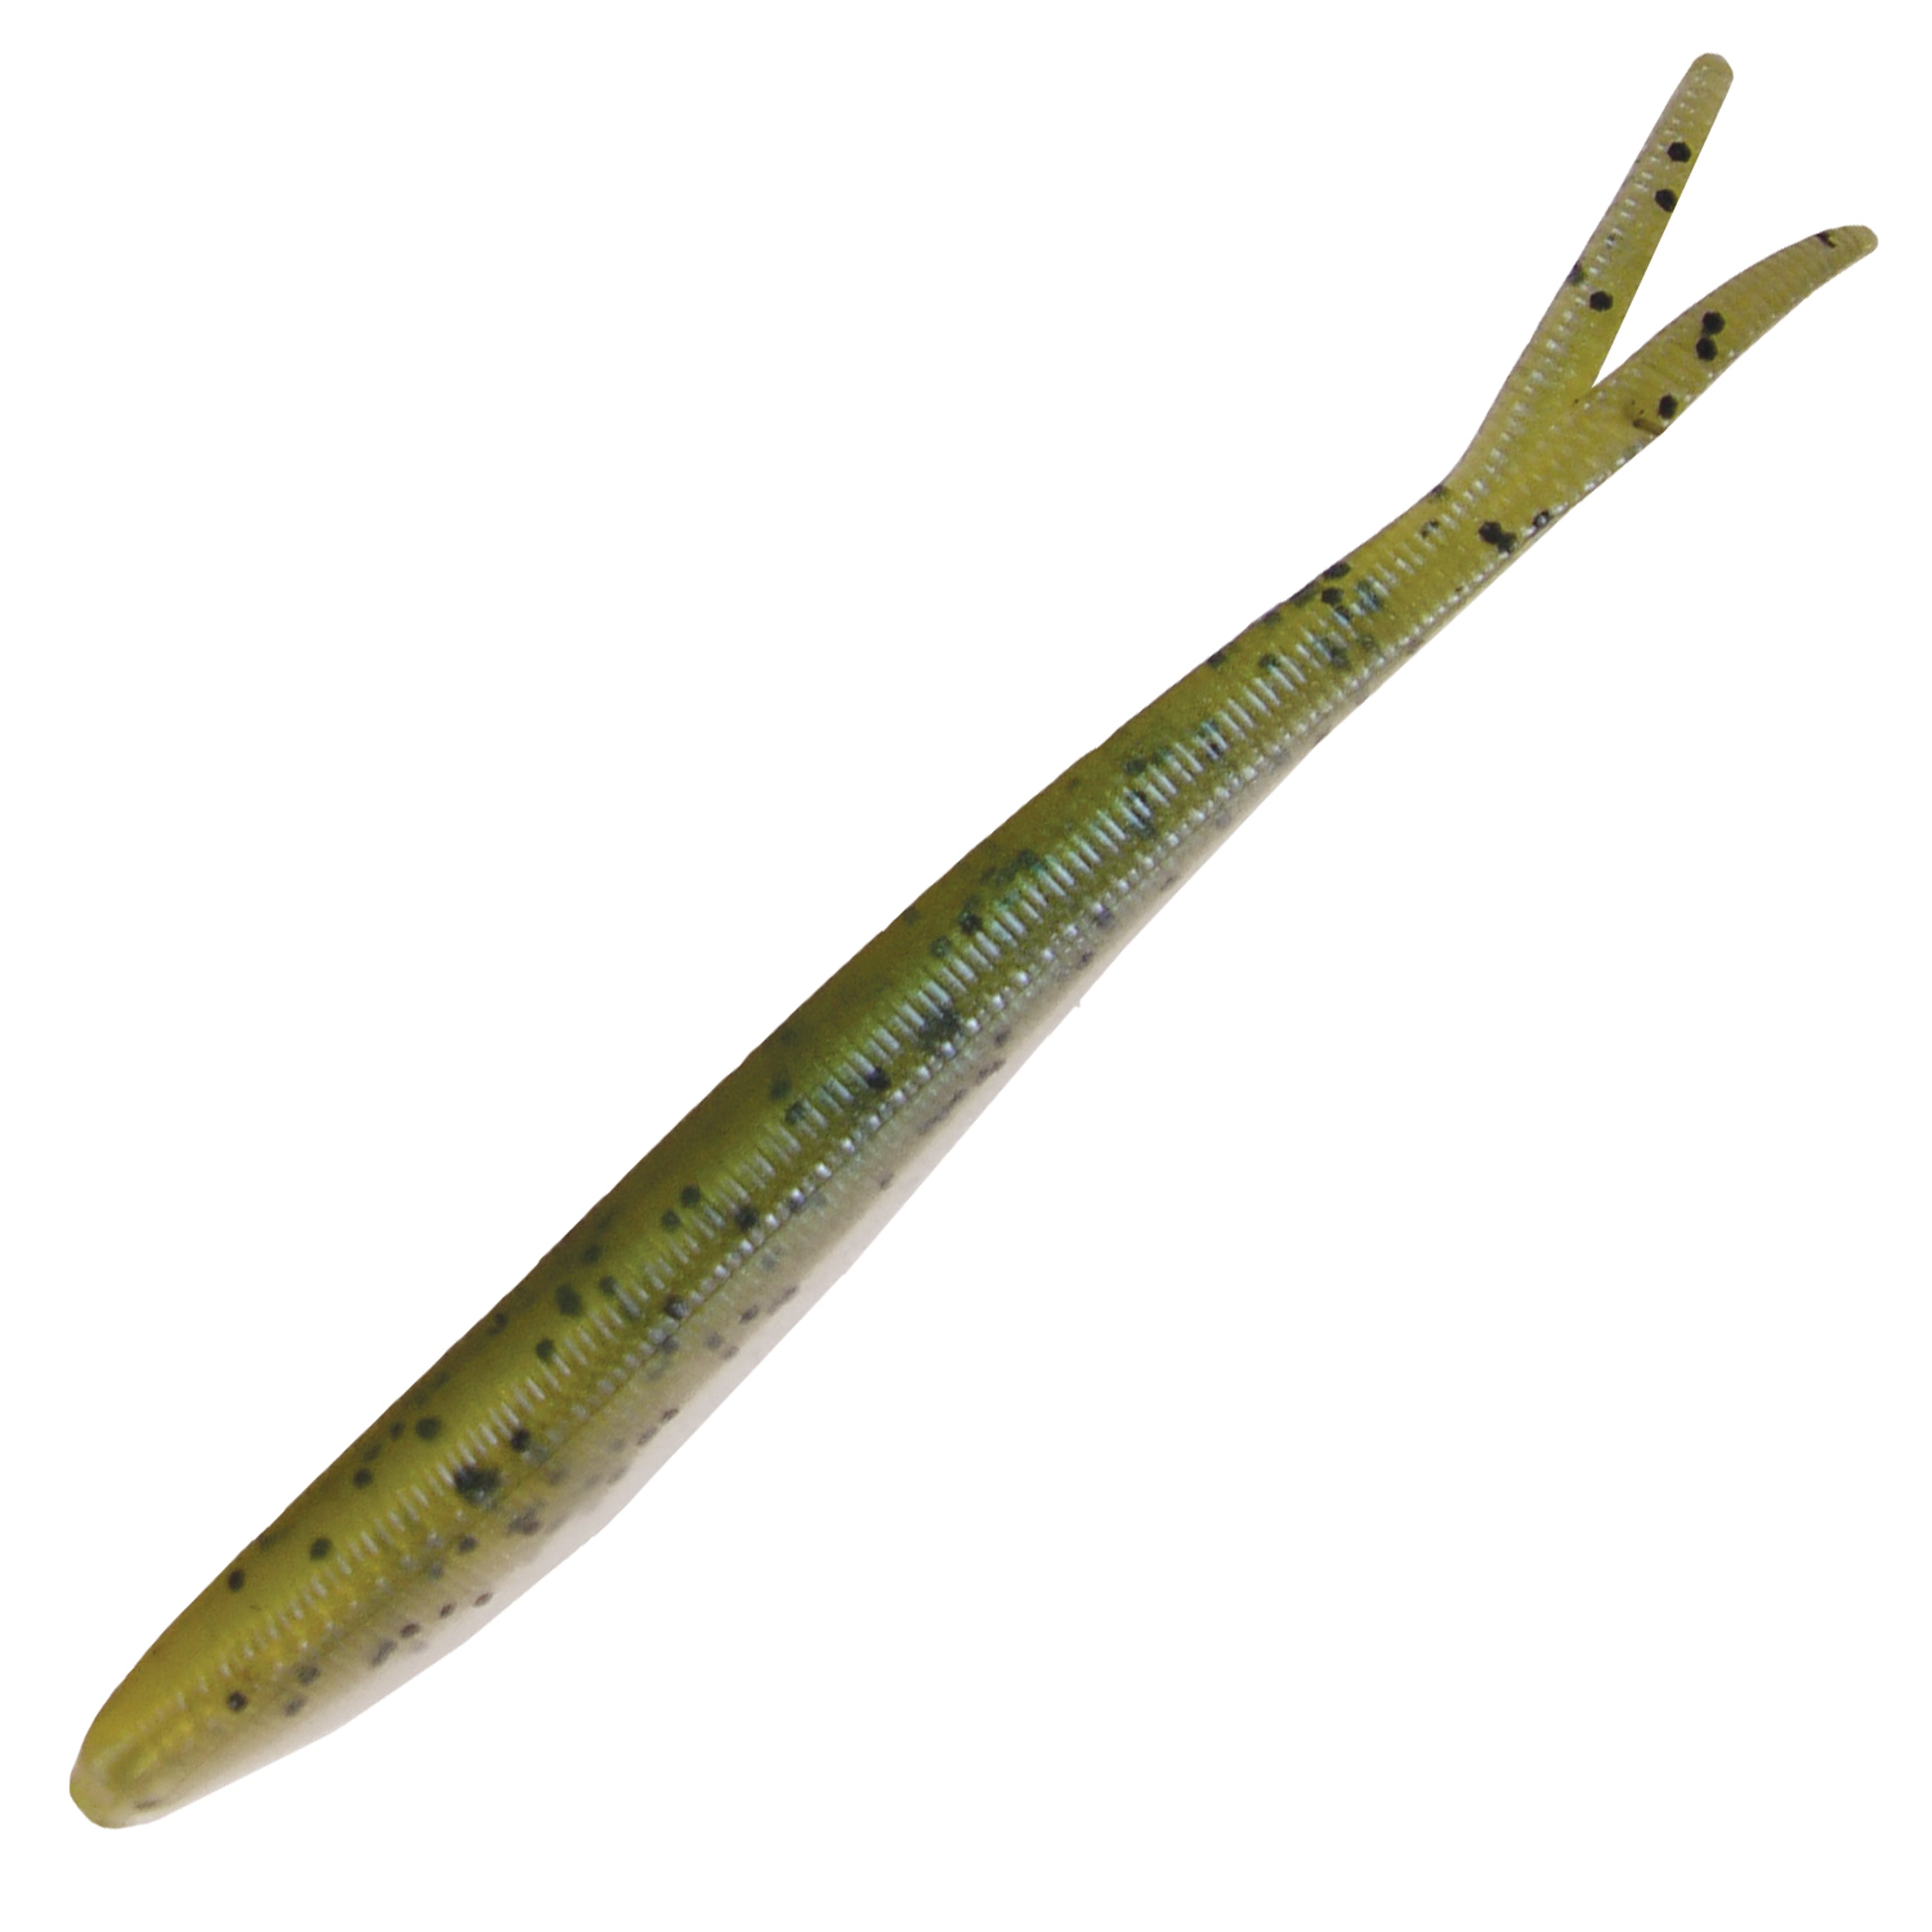 Jrz Luresmeredith Jerk Minnow 14g Floating Lure - 24 Colors, Strong Hook &  Ring